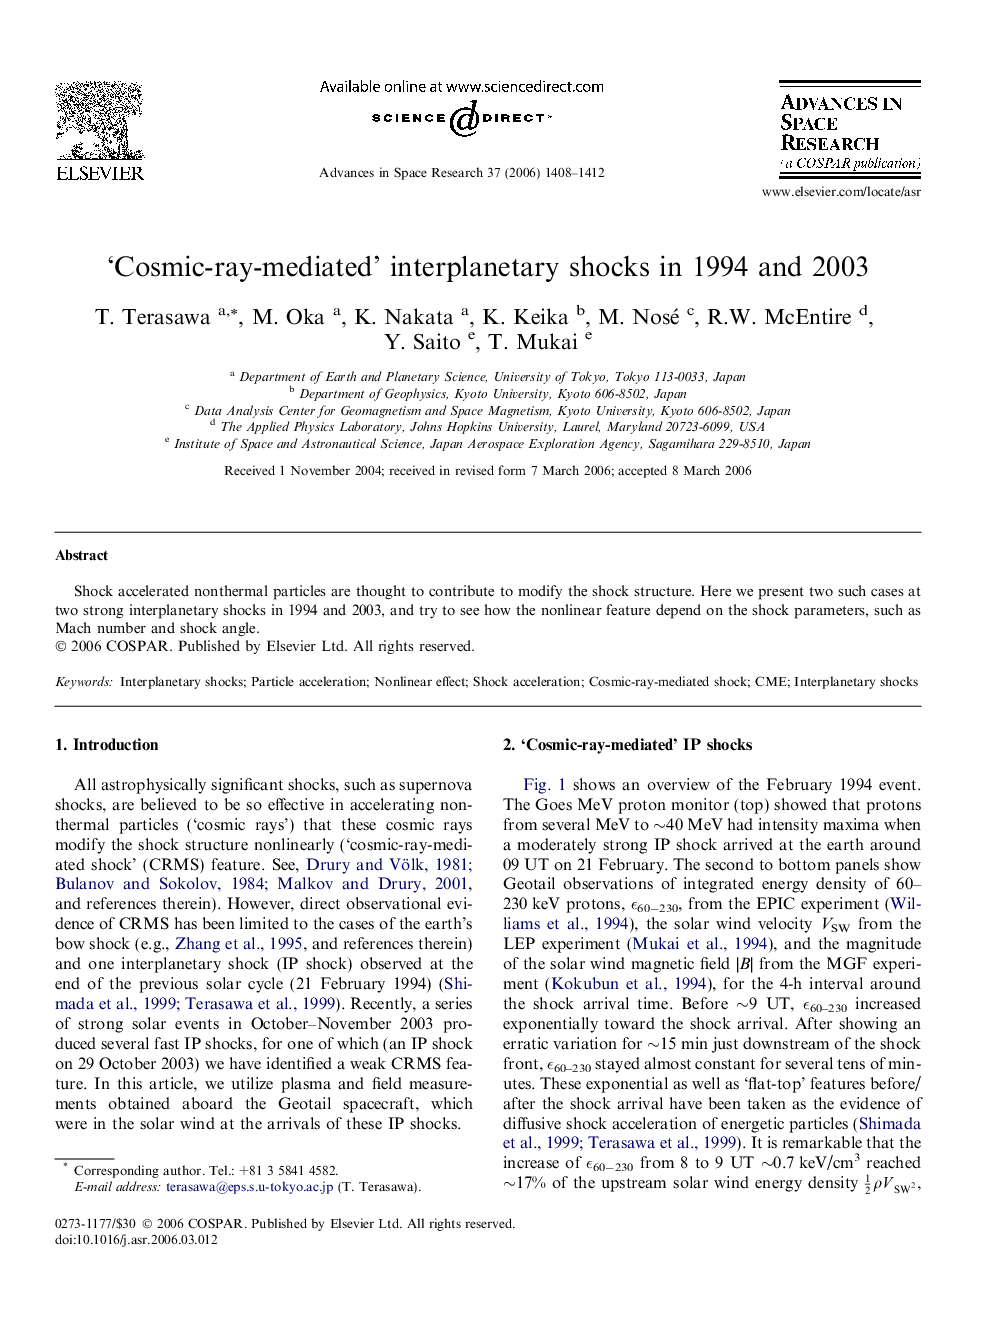 ‘Cosmic-ray-mediated’ interplanetary shocks in 1994 and 2003